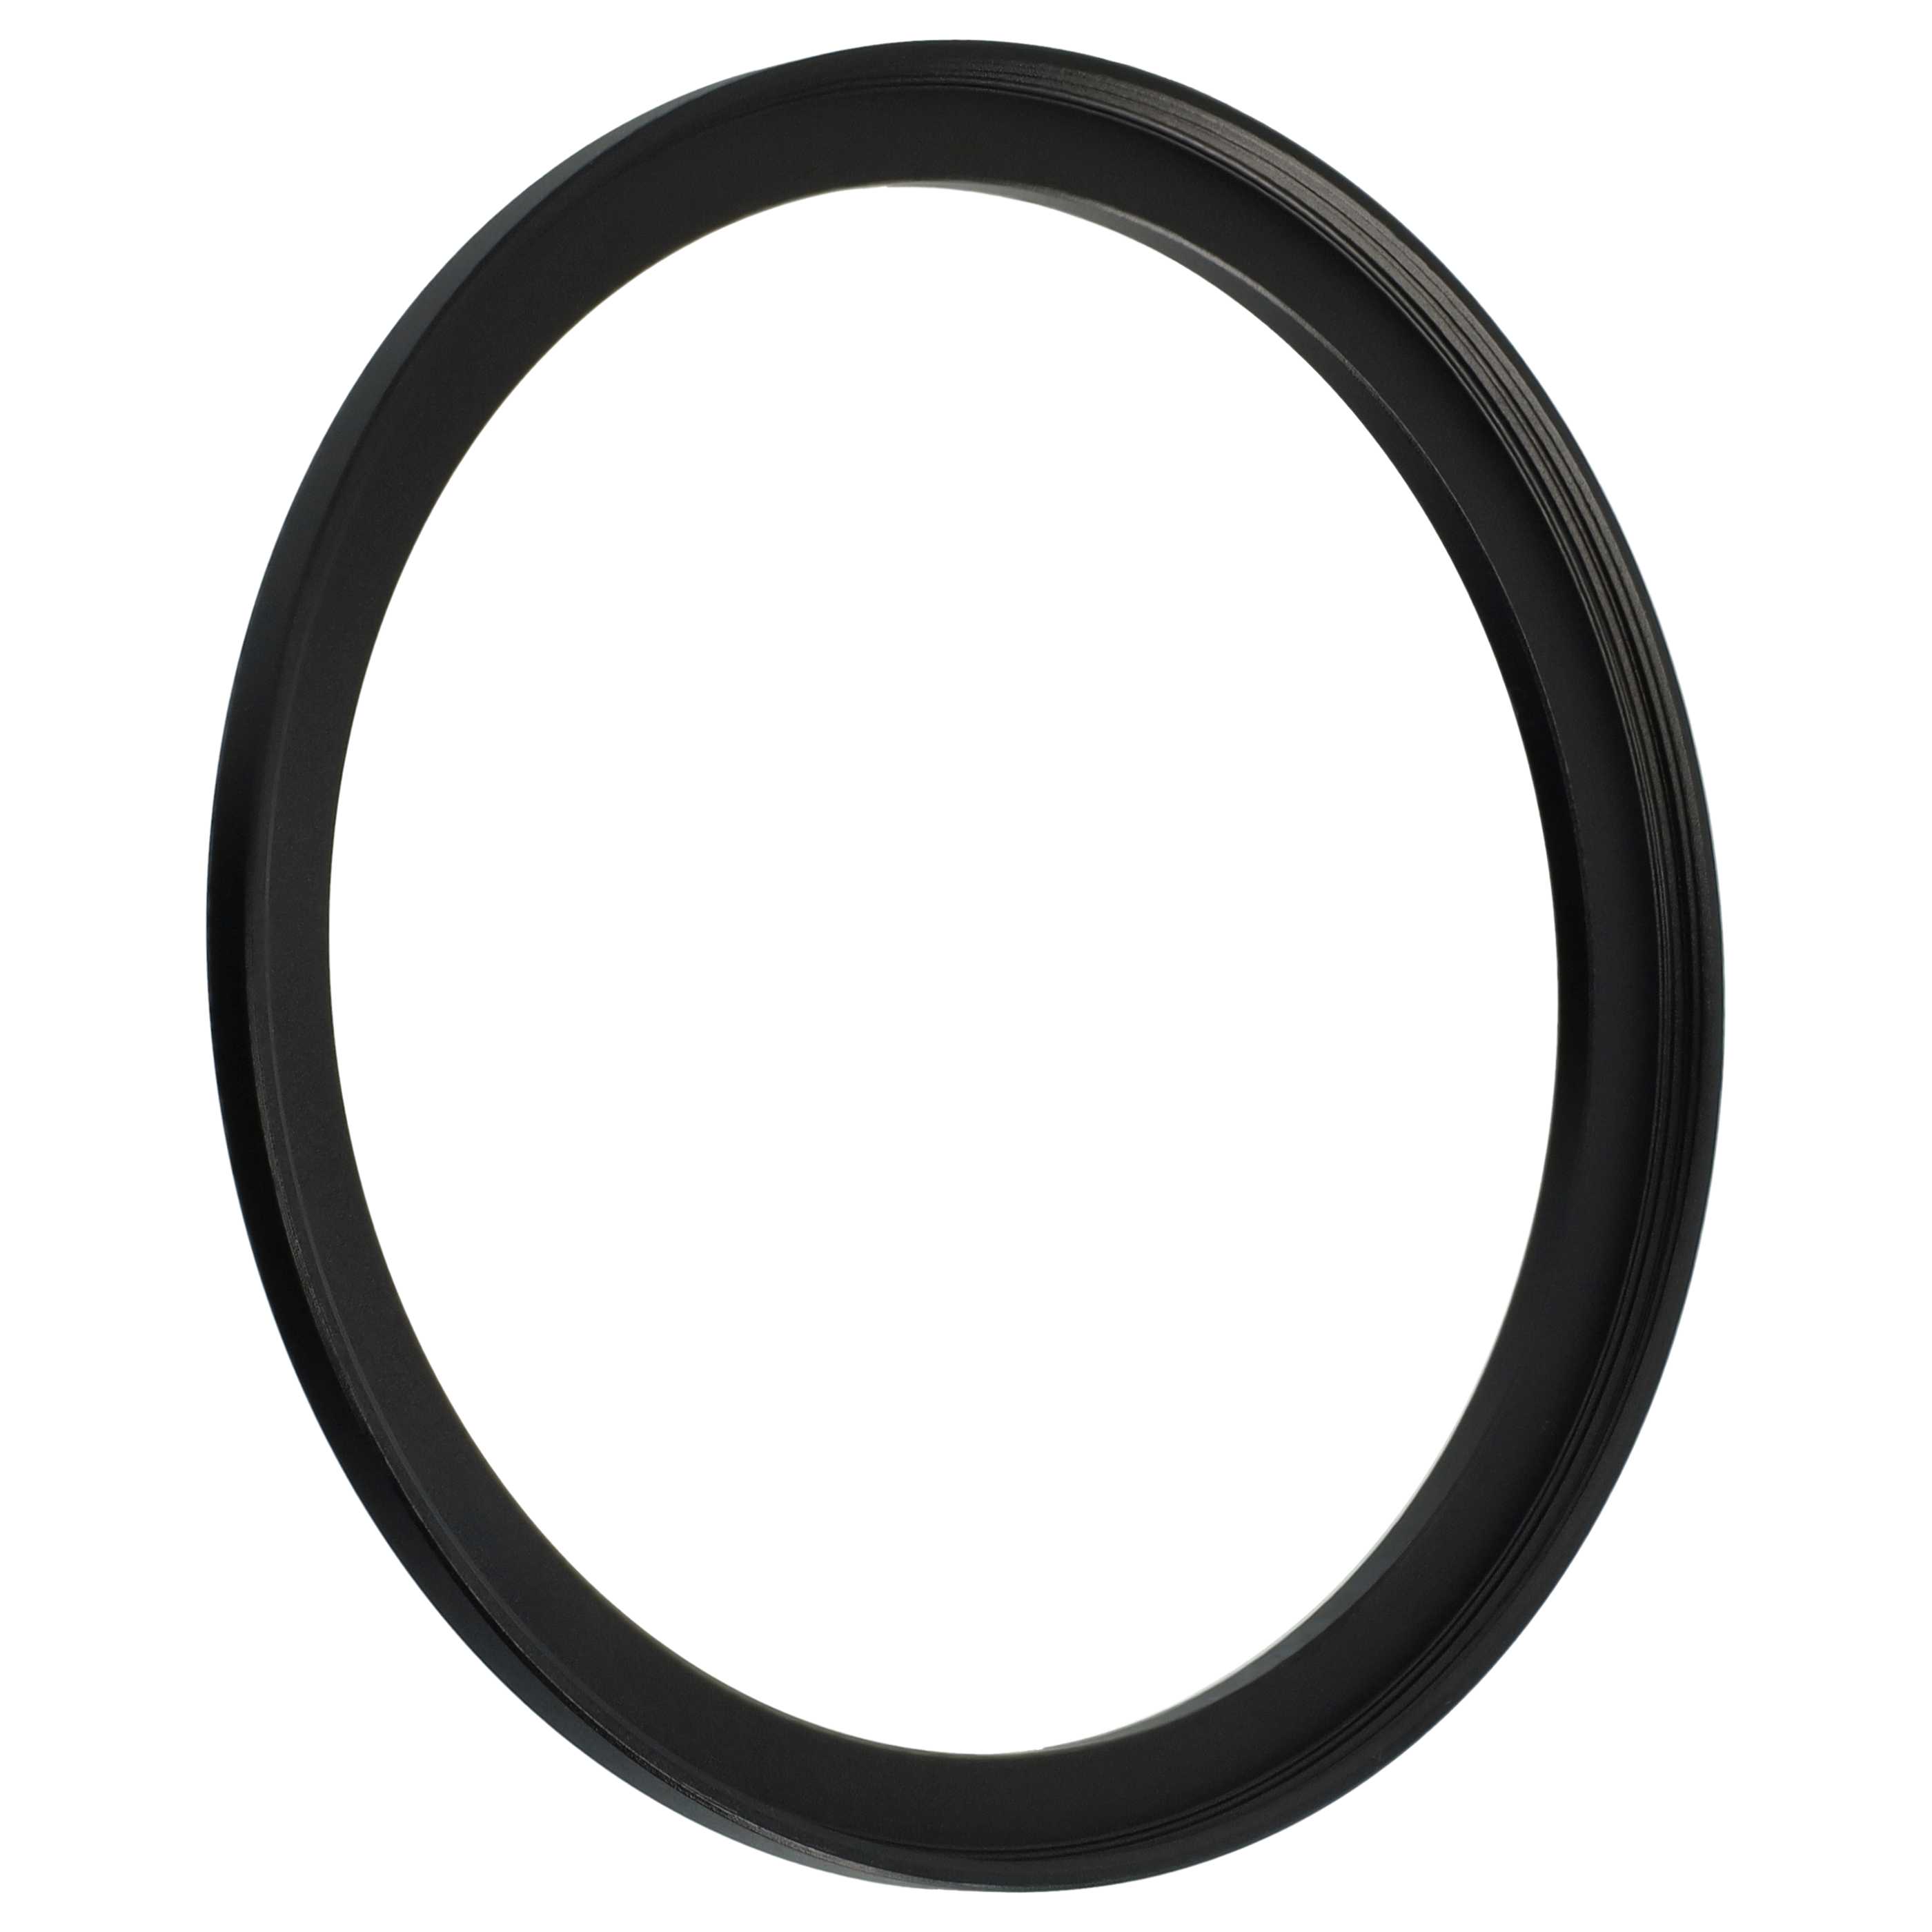 Step-Up Ring Adapter of 86 mm to 95 mmfor various Camera Lens - Filter Adapter